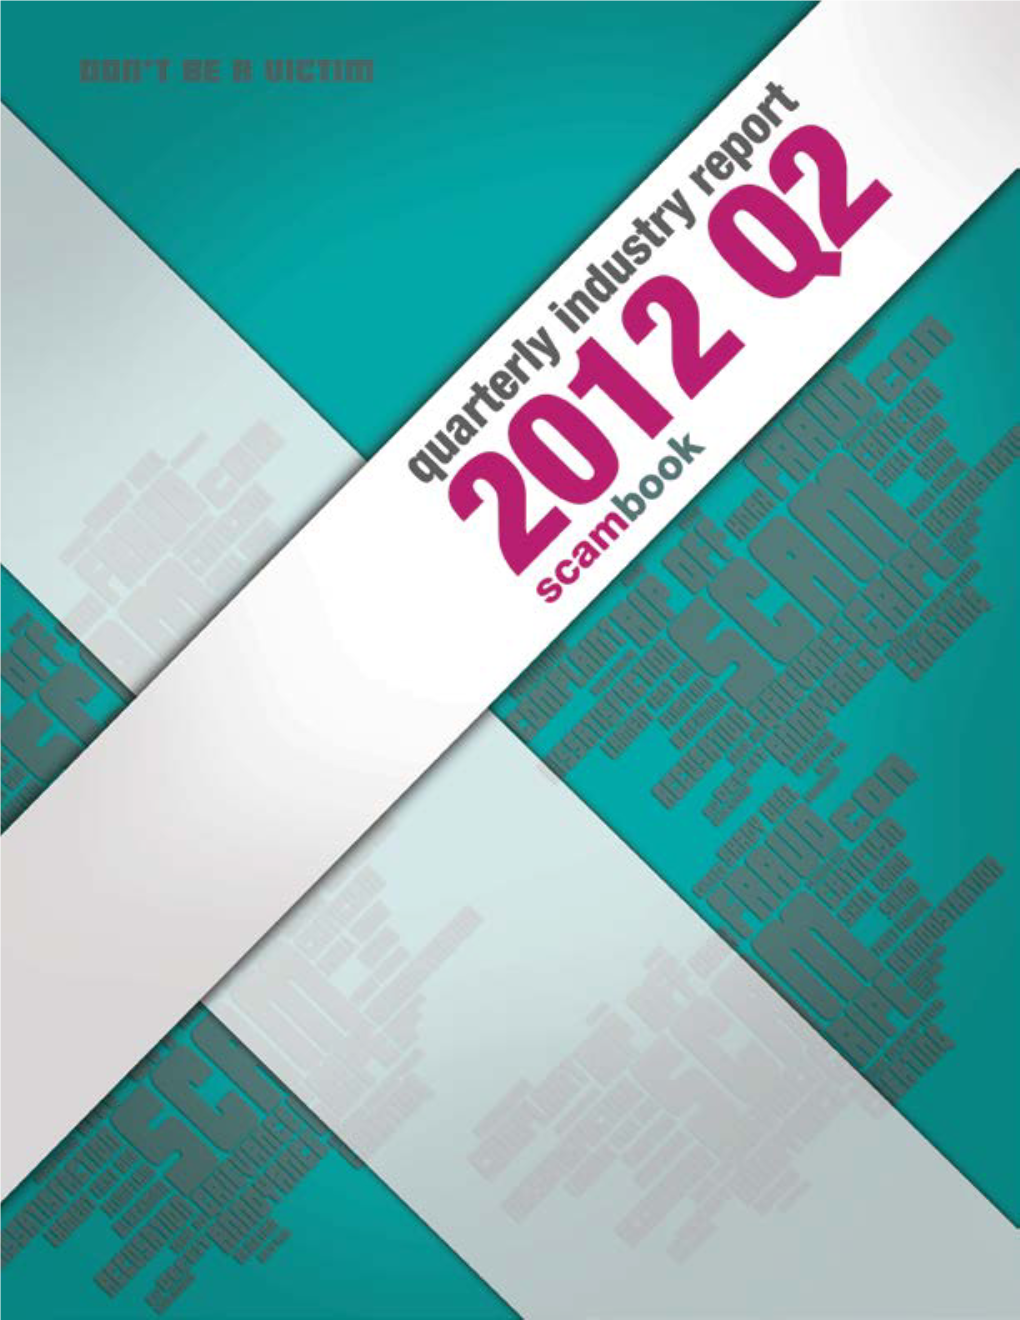 Scam and Complaints Industry Report 2012 Q2.Pdf